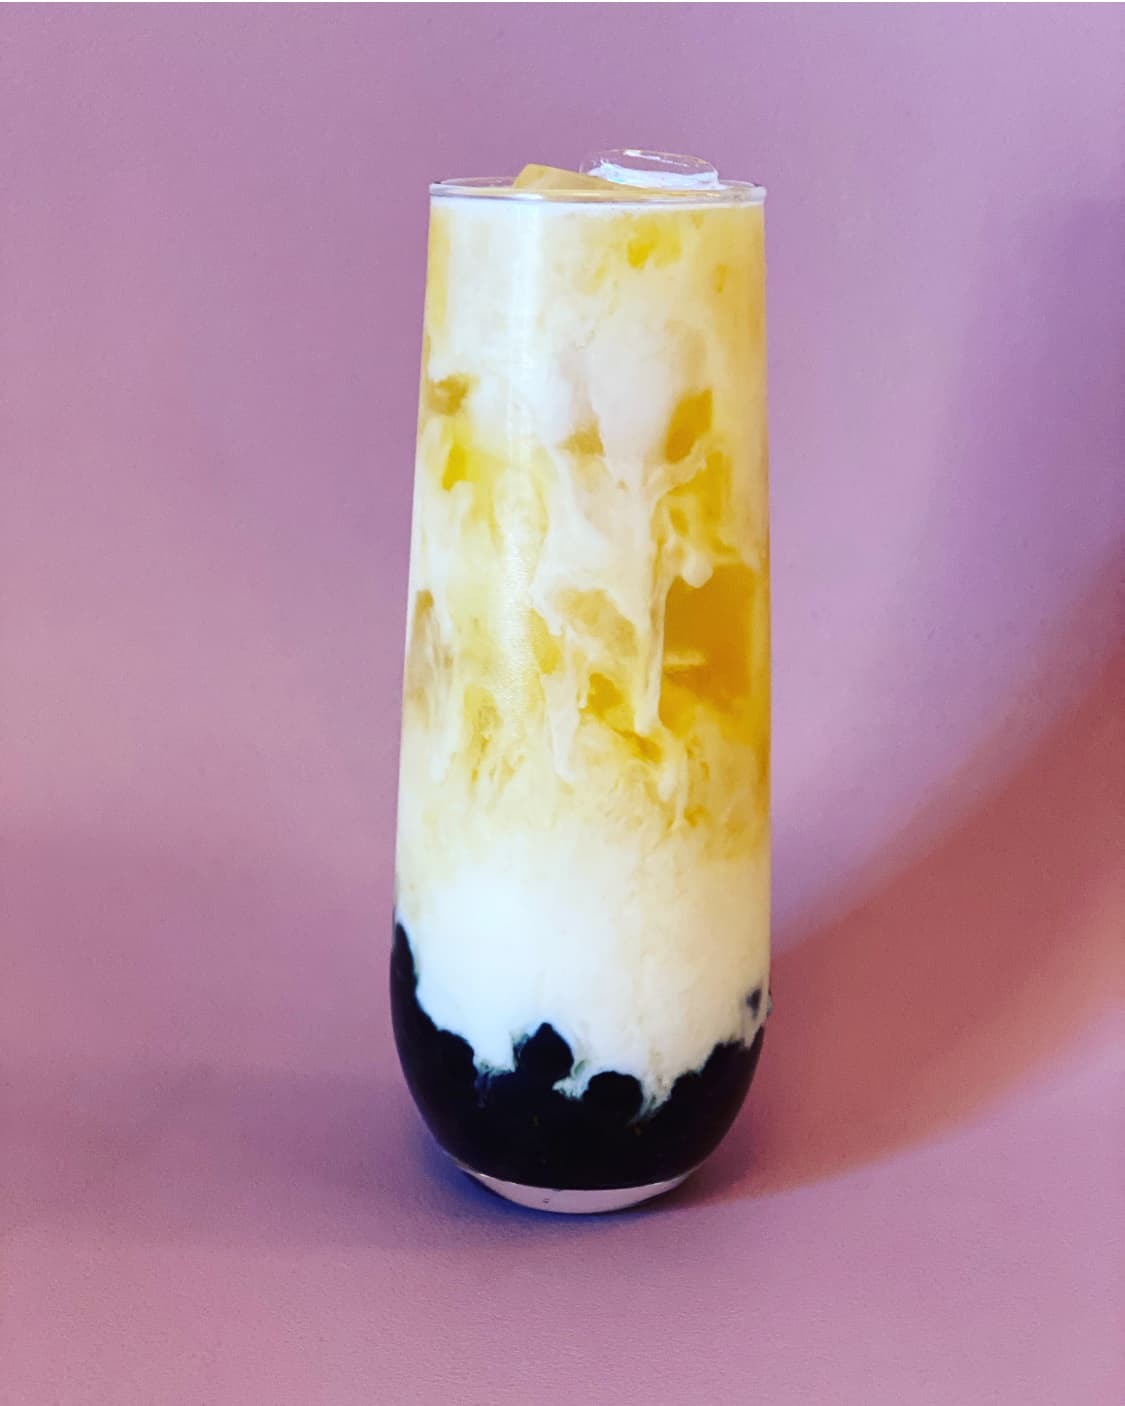 How Oolong Milk Tea is Different than Any Other Drinks